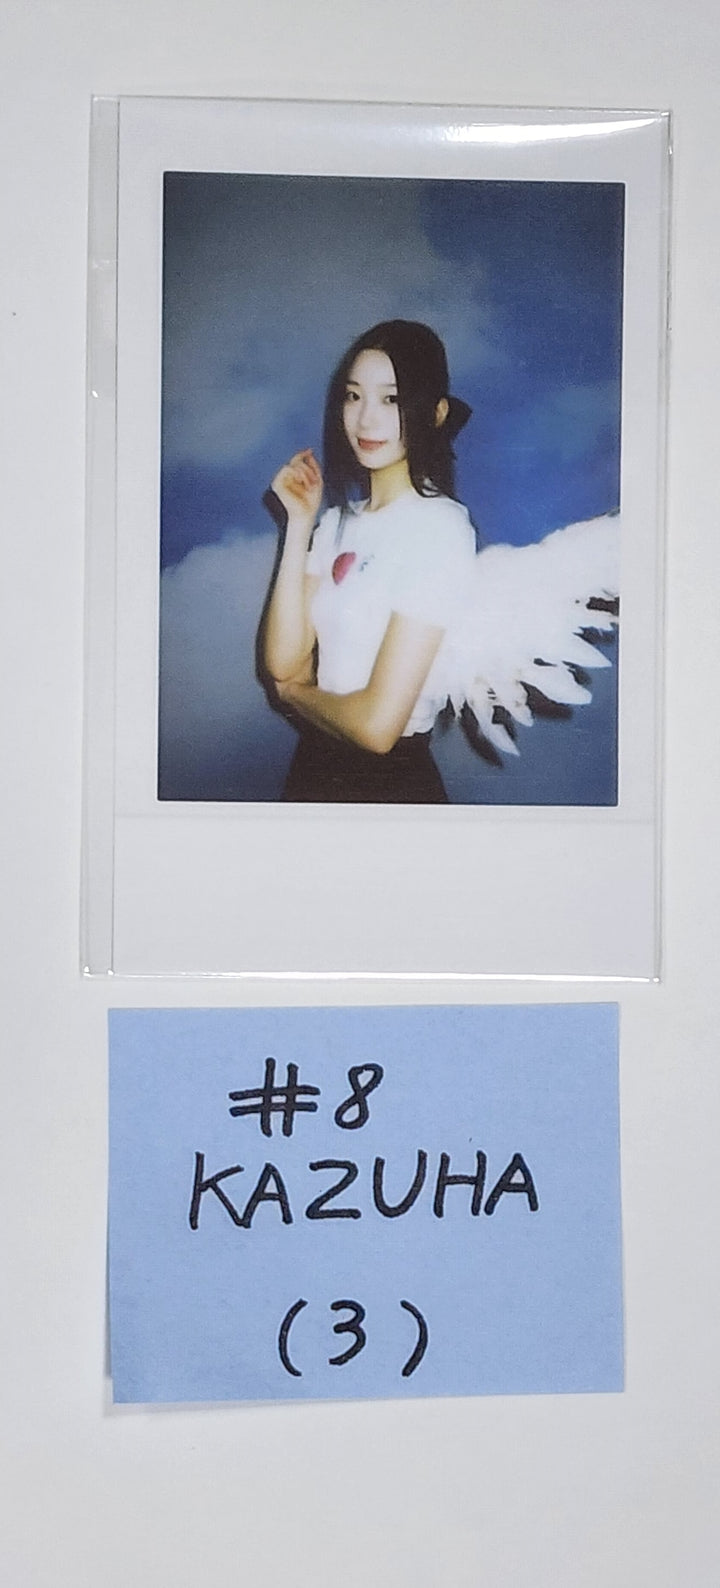 Le Sserafim - 2023 S/S Pop-up Store MD Event Photocard [Restocked 8/7]